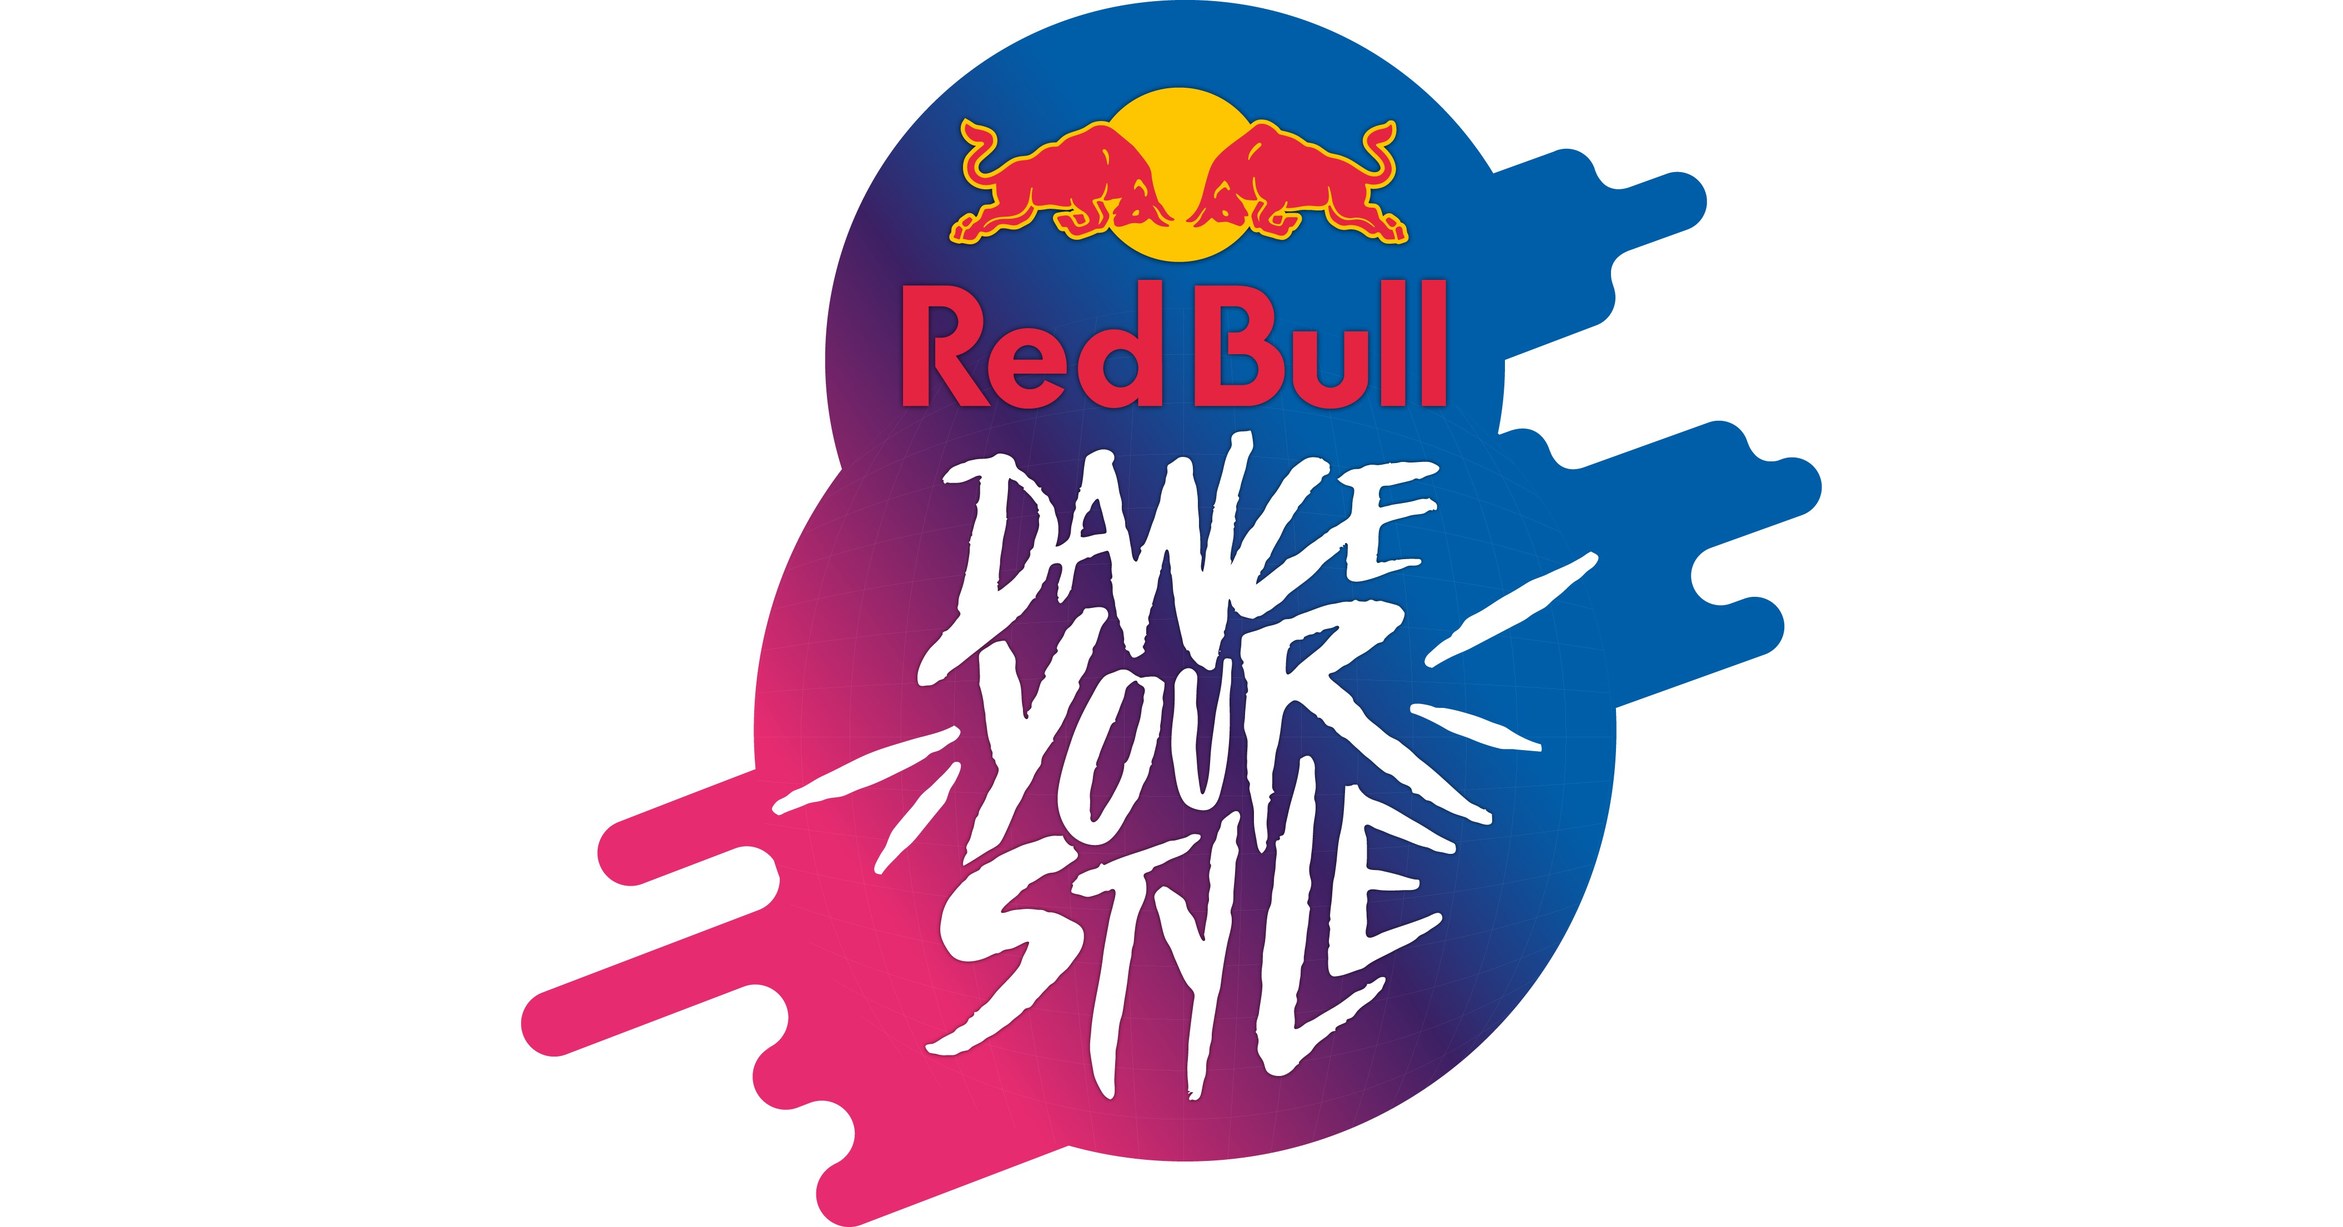 Red Bull Announces Dance Your Style